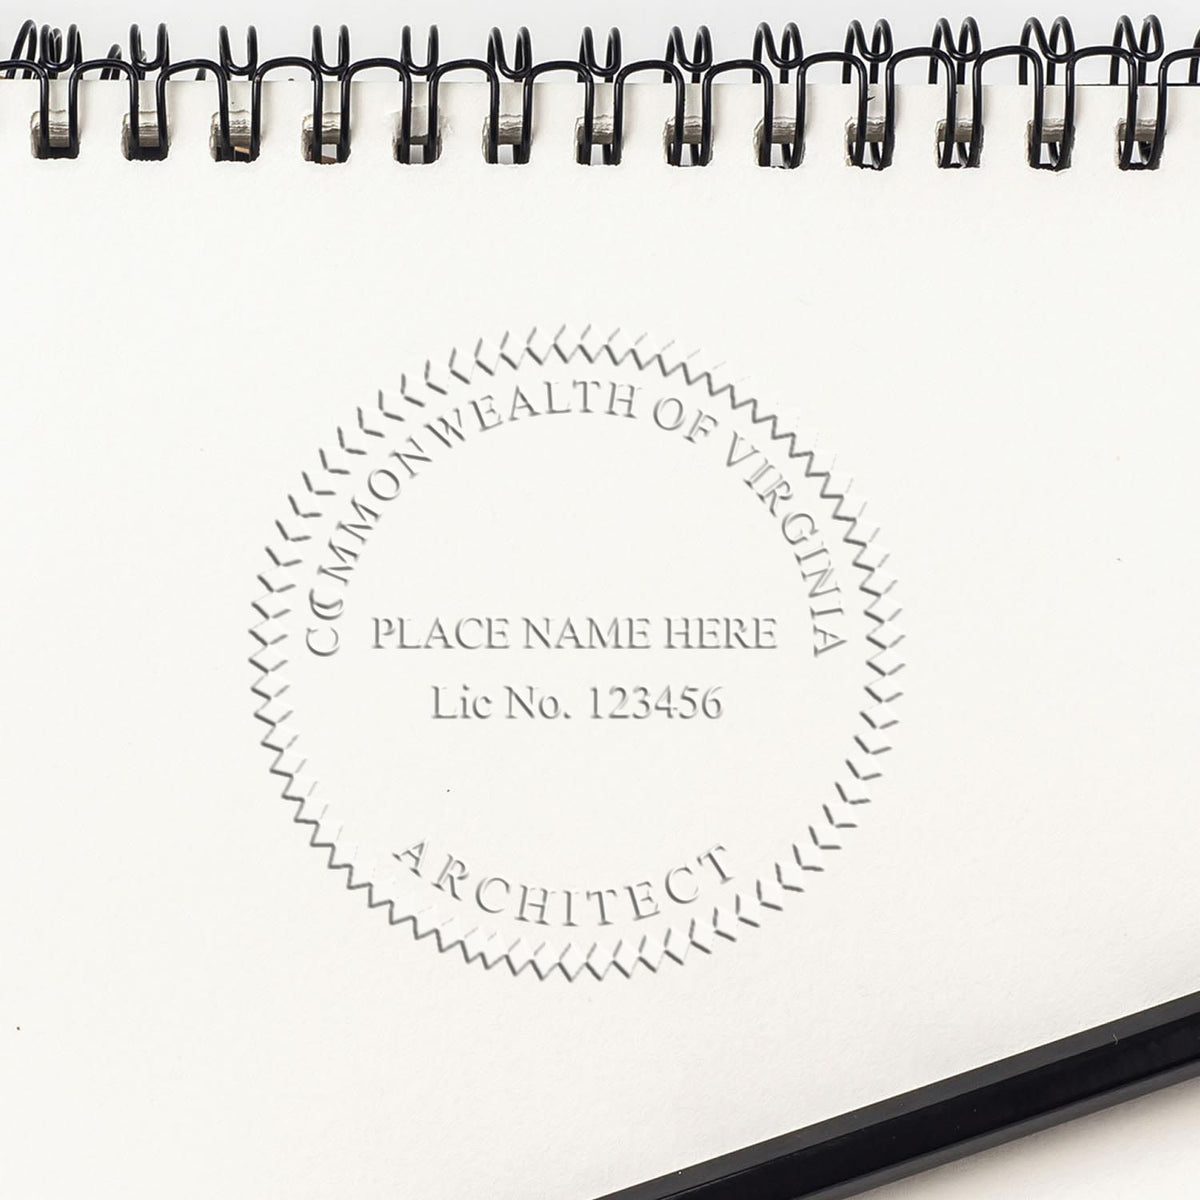 A stamped impression of the Virginia Desk Architect Embossing Seal in this stylish lifestyle photo, setting the tone for a unique and personalized product.